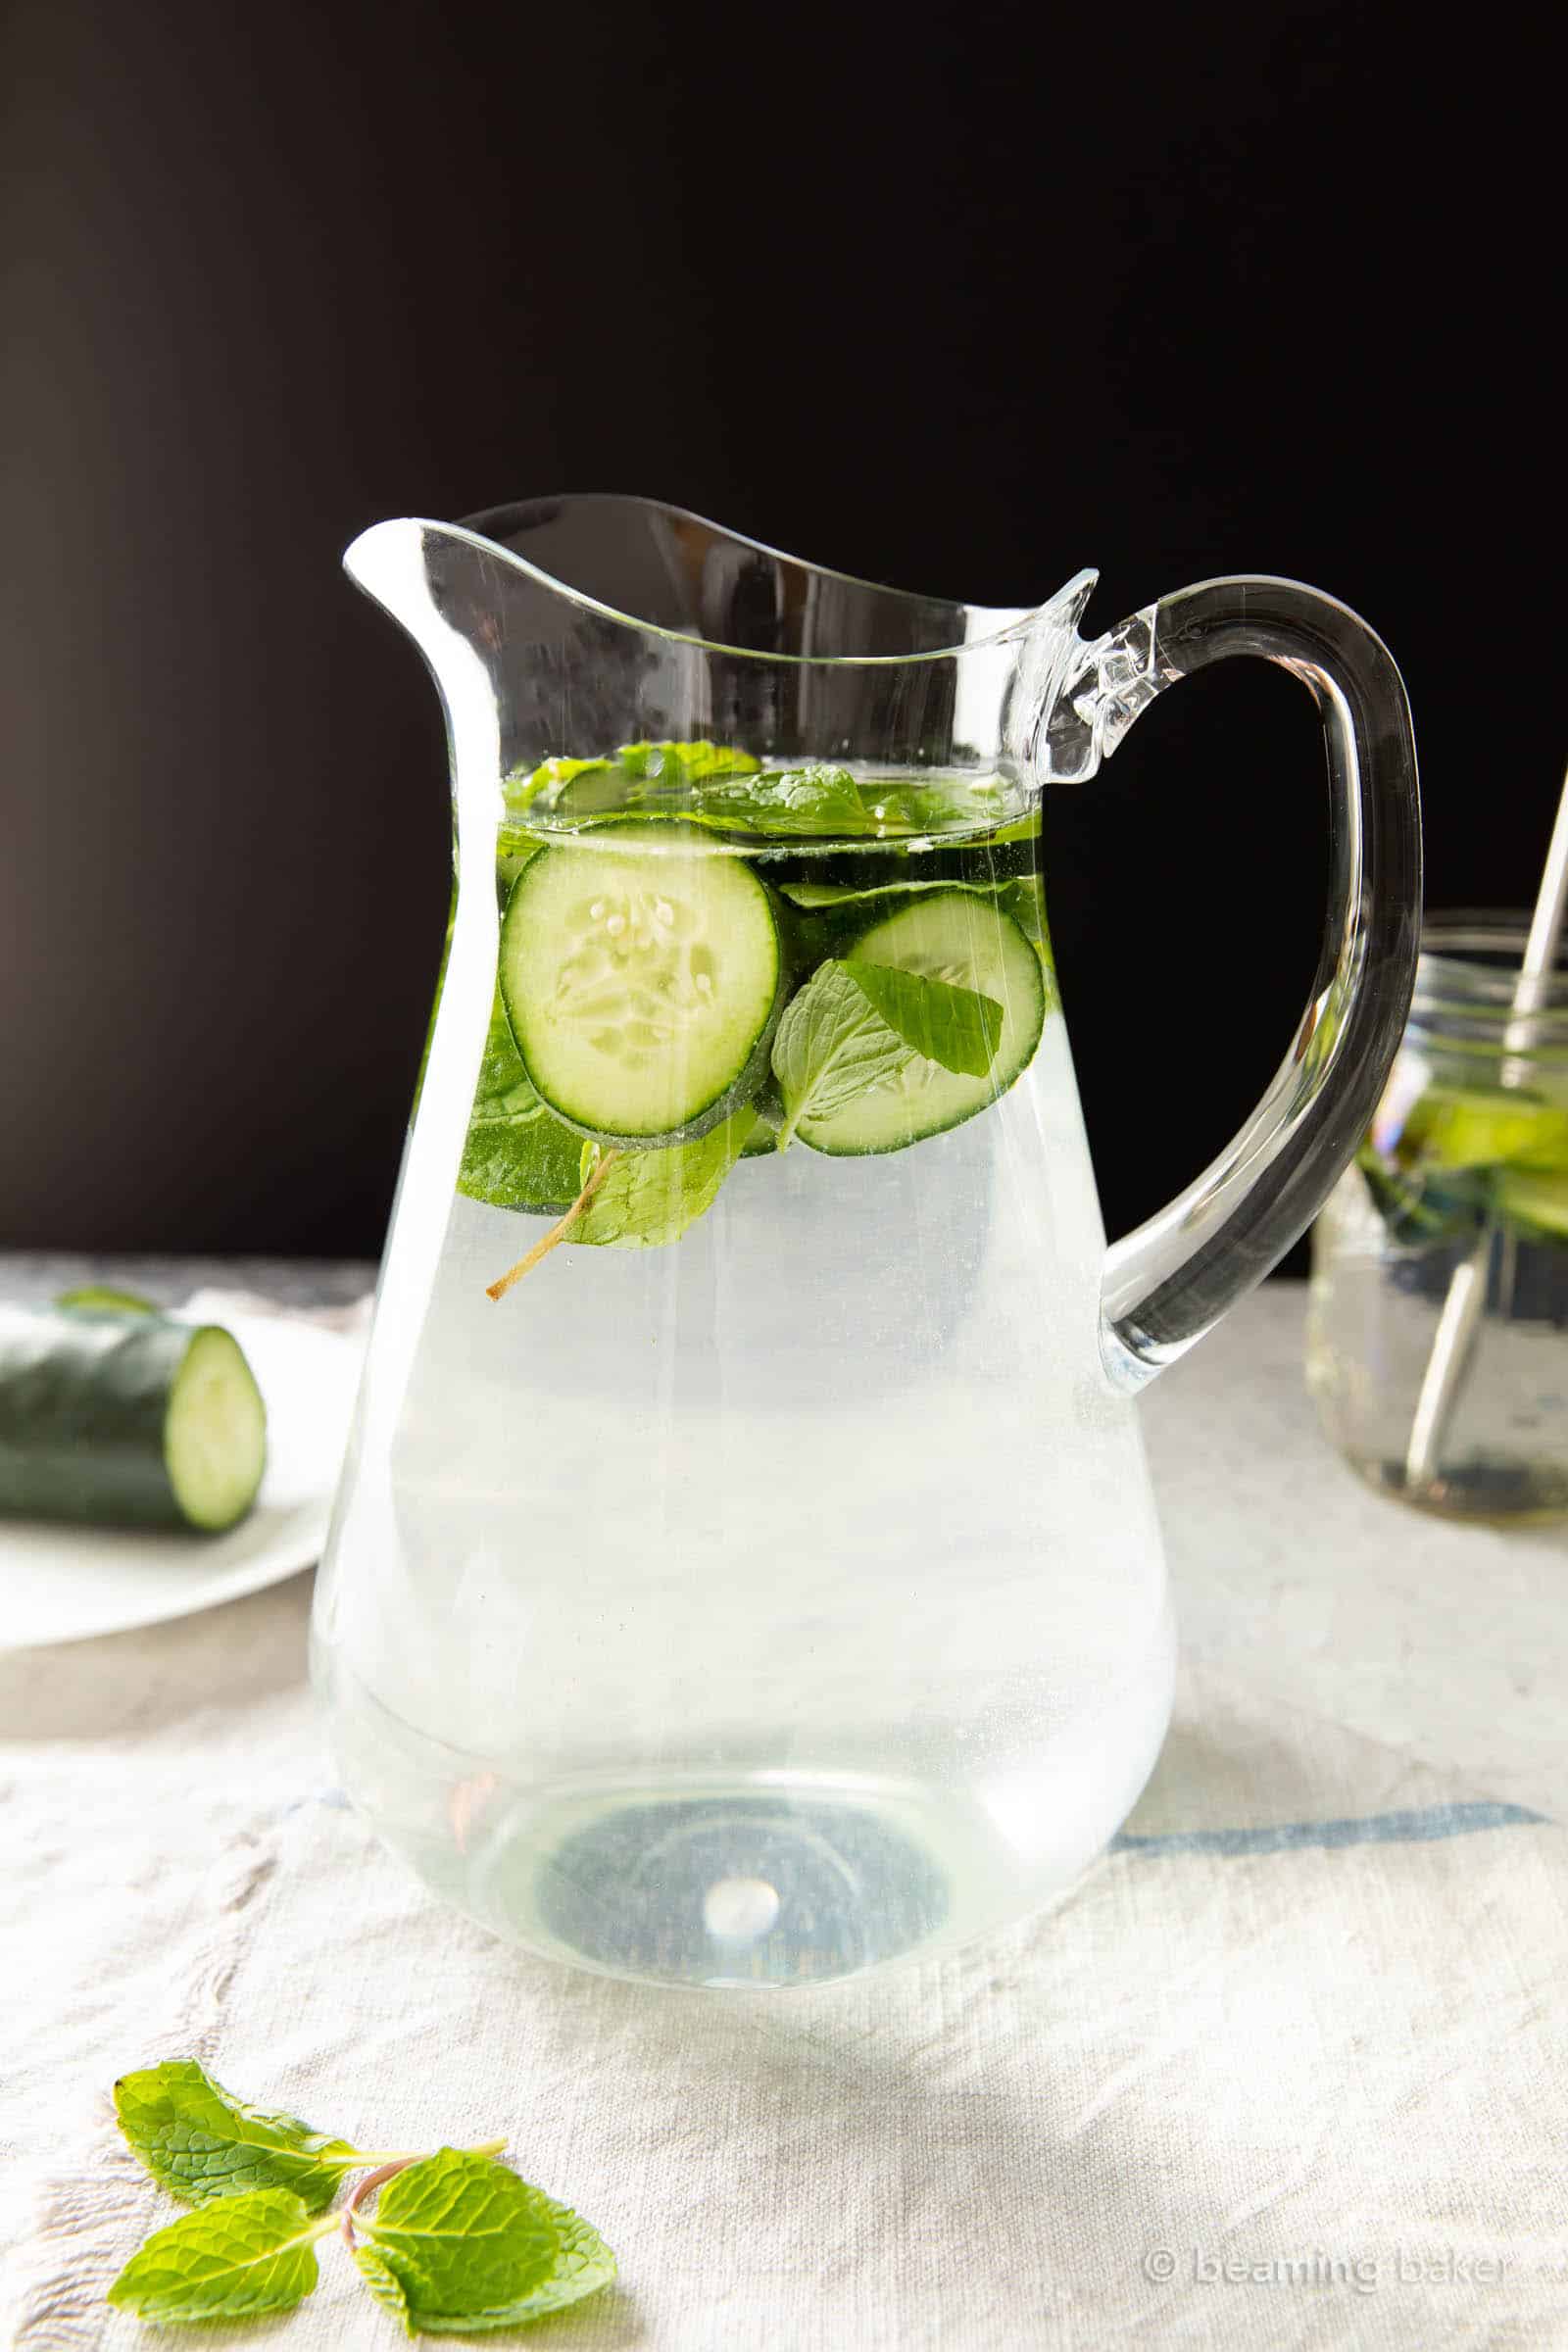 Pitcher of cucum er mint water with half a cucumber and some mint leaves sitting nearby on the table